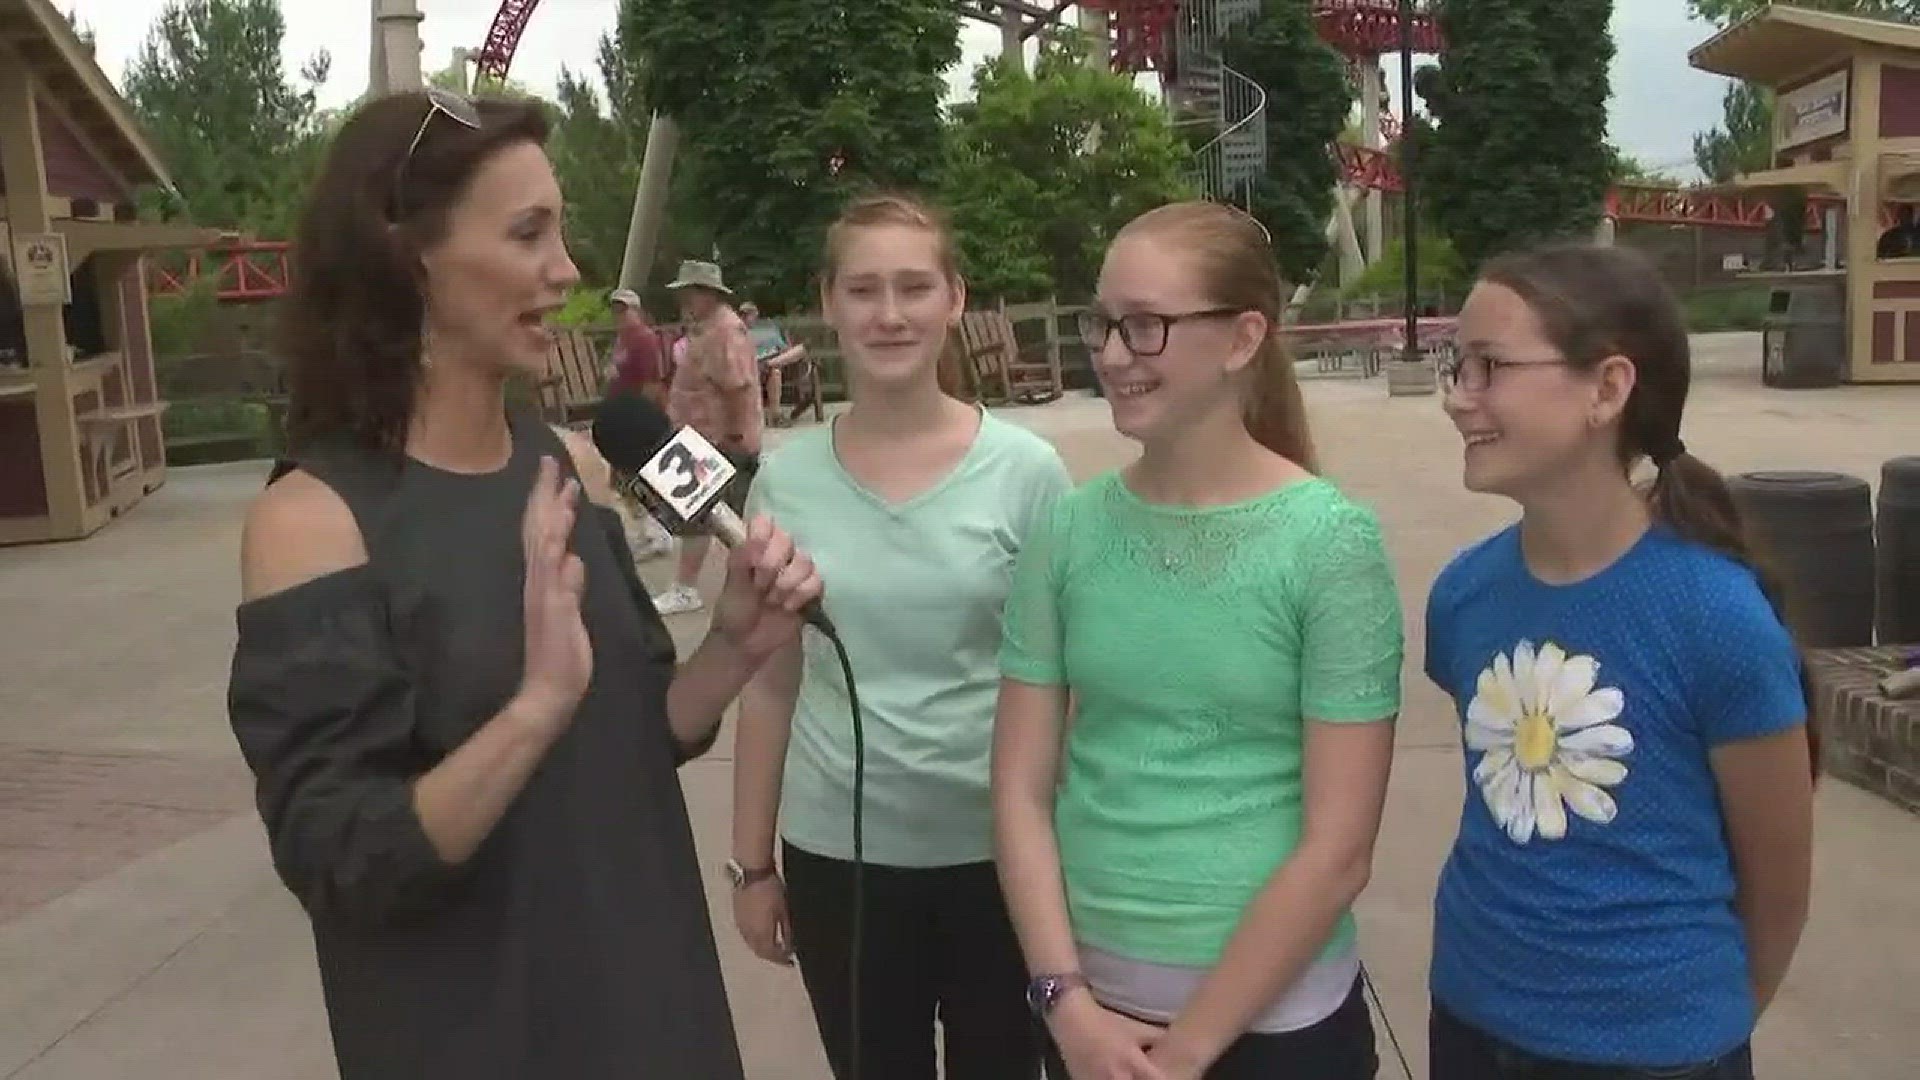 Girls in STEM: Why Cedar Point is a great place to learn